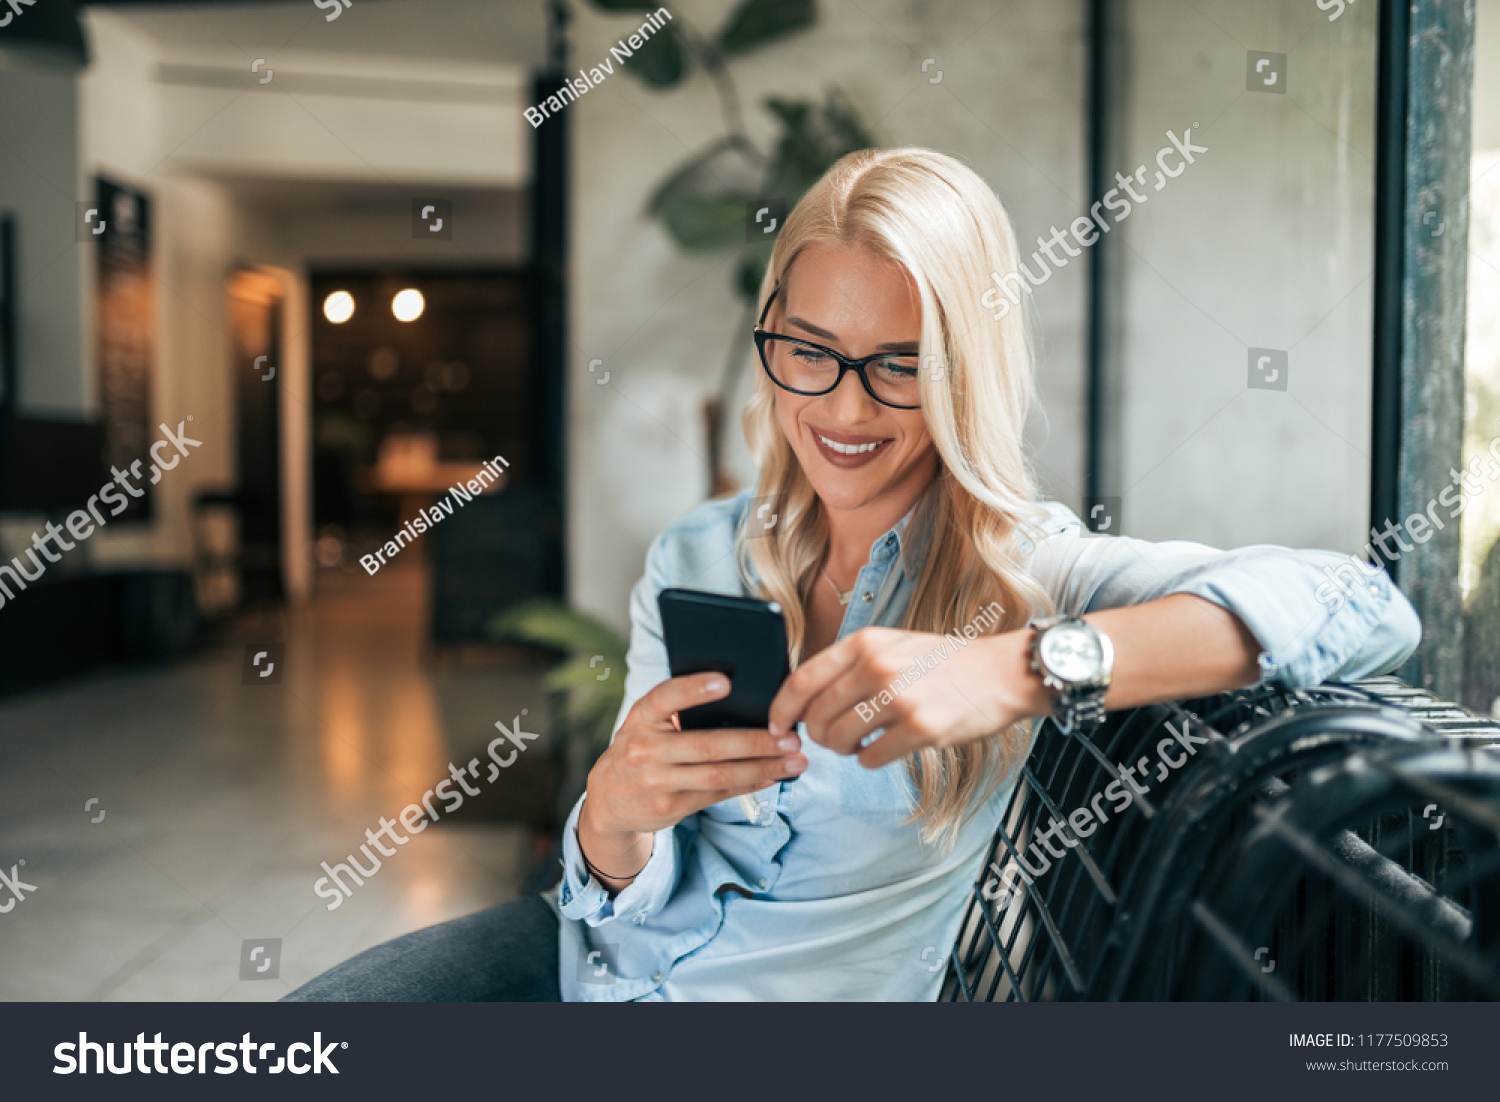 Close-up image of gorgeous blonde woman texting indoors. #1177509853